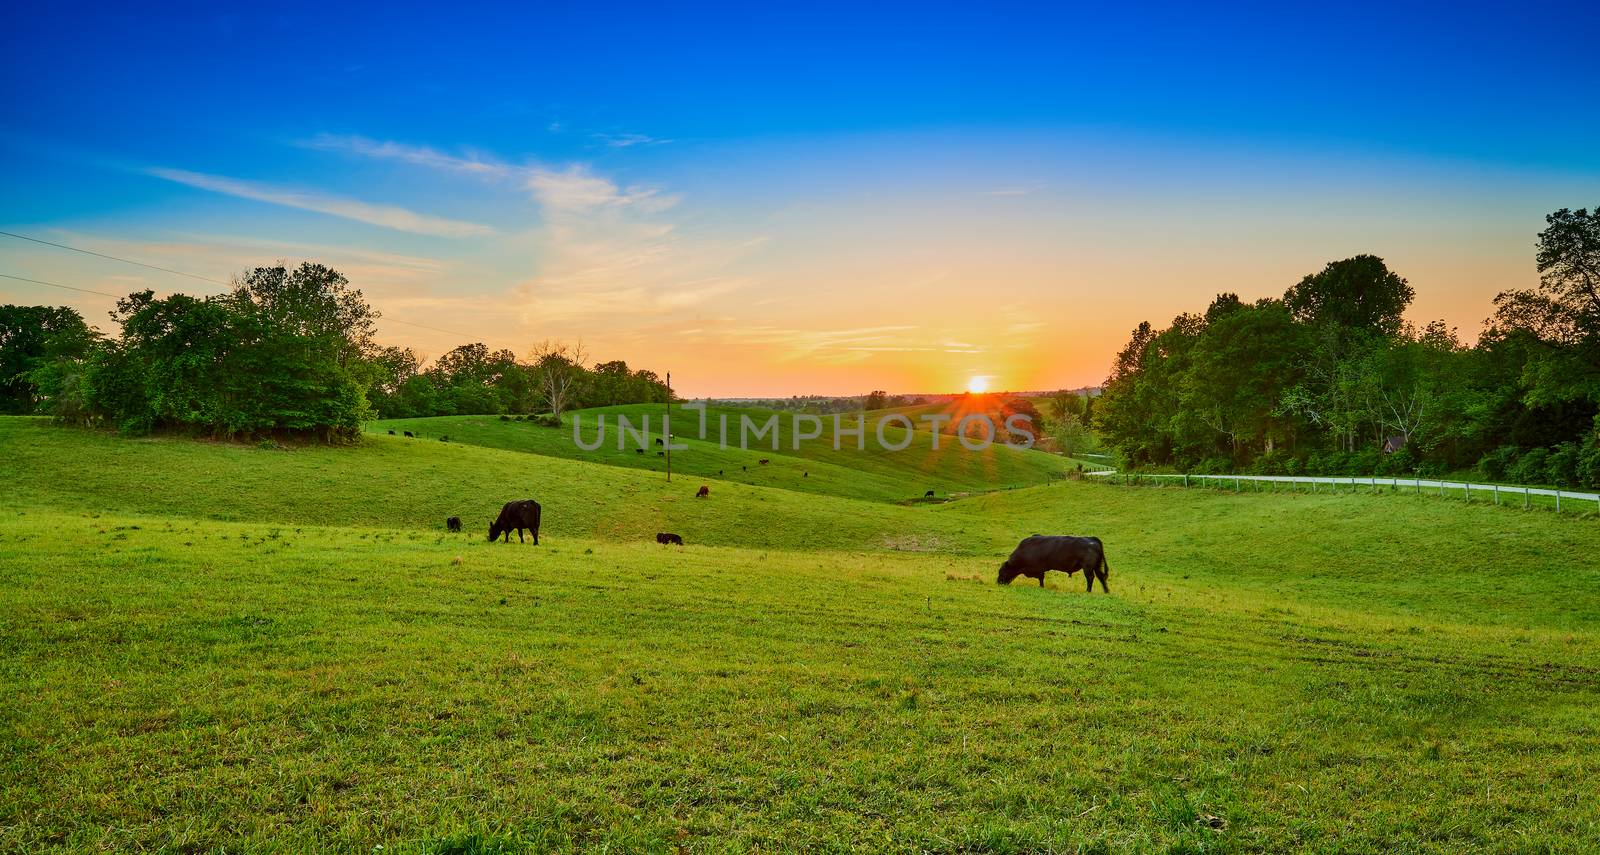 Cows grazing at sunset.